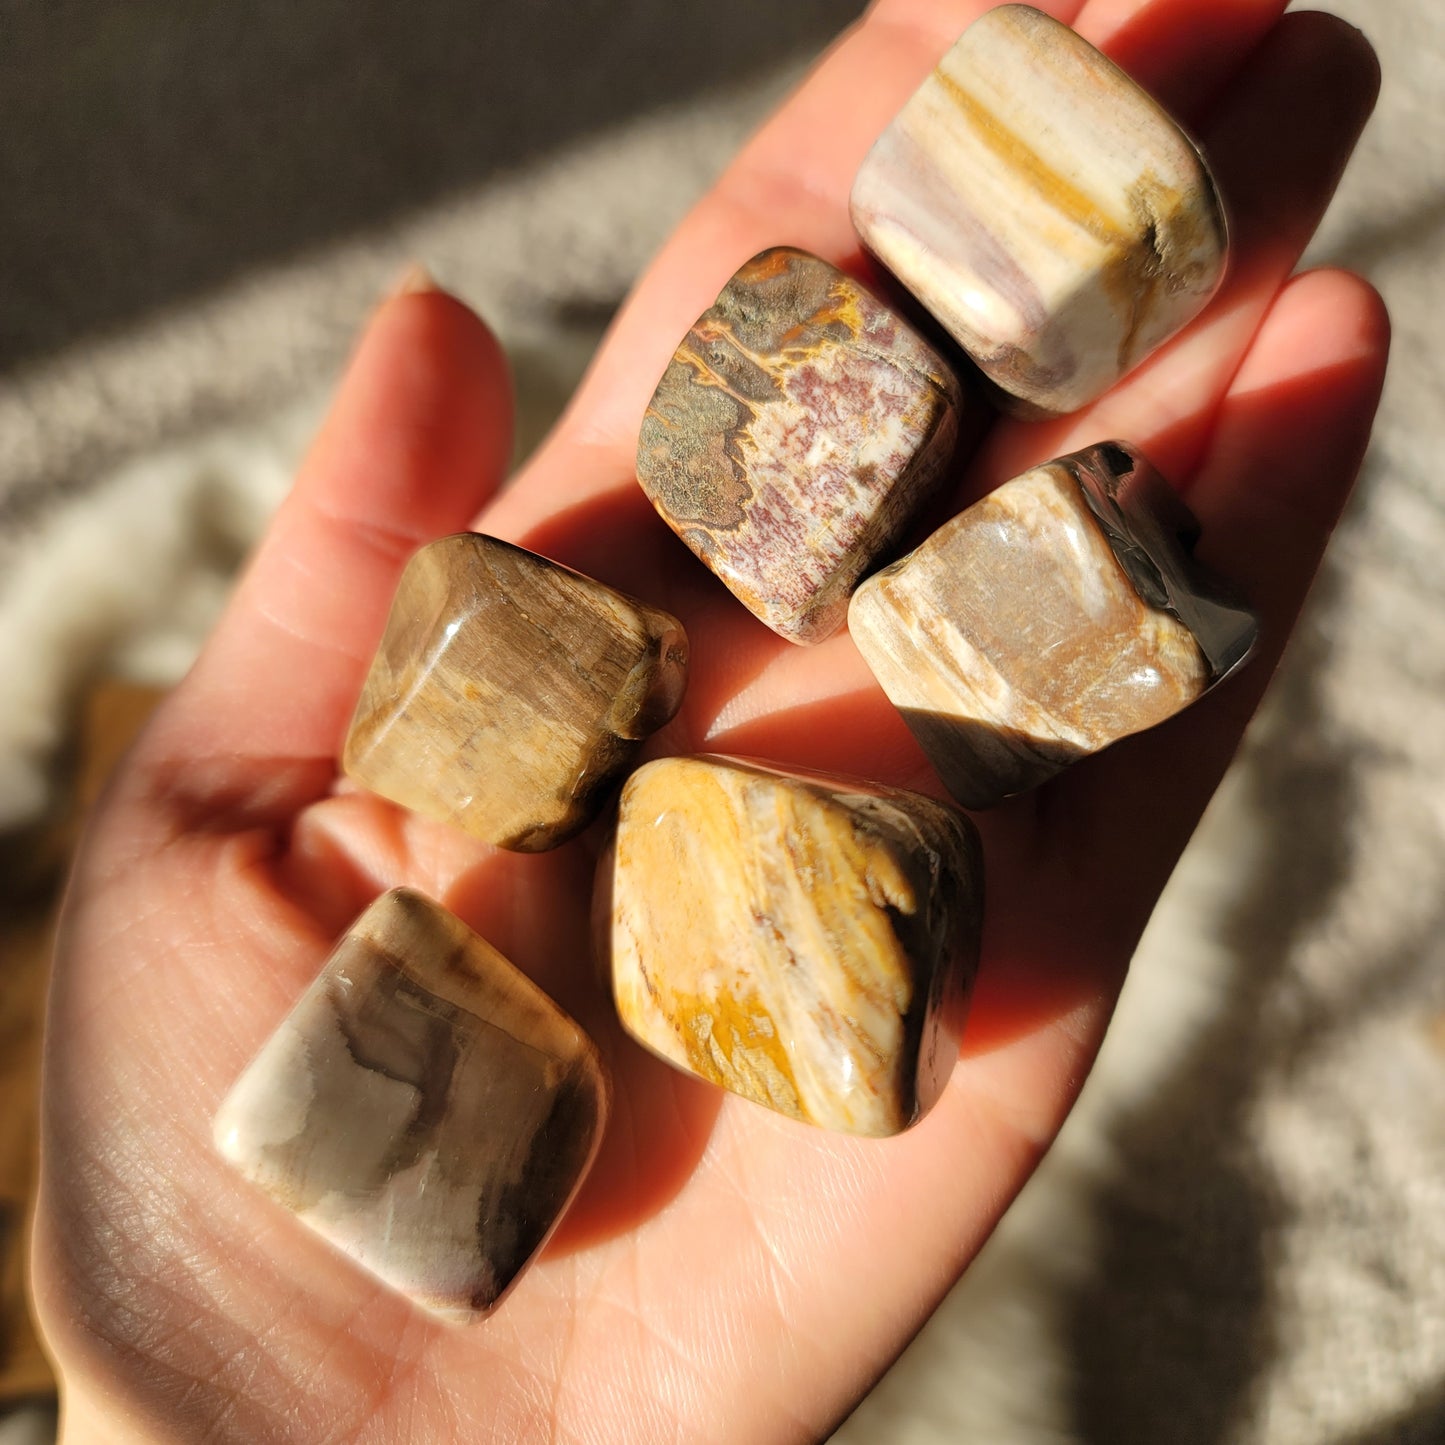 Petrified Wood || transformation, stability, patience